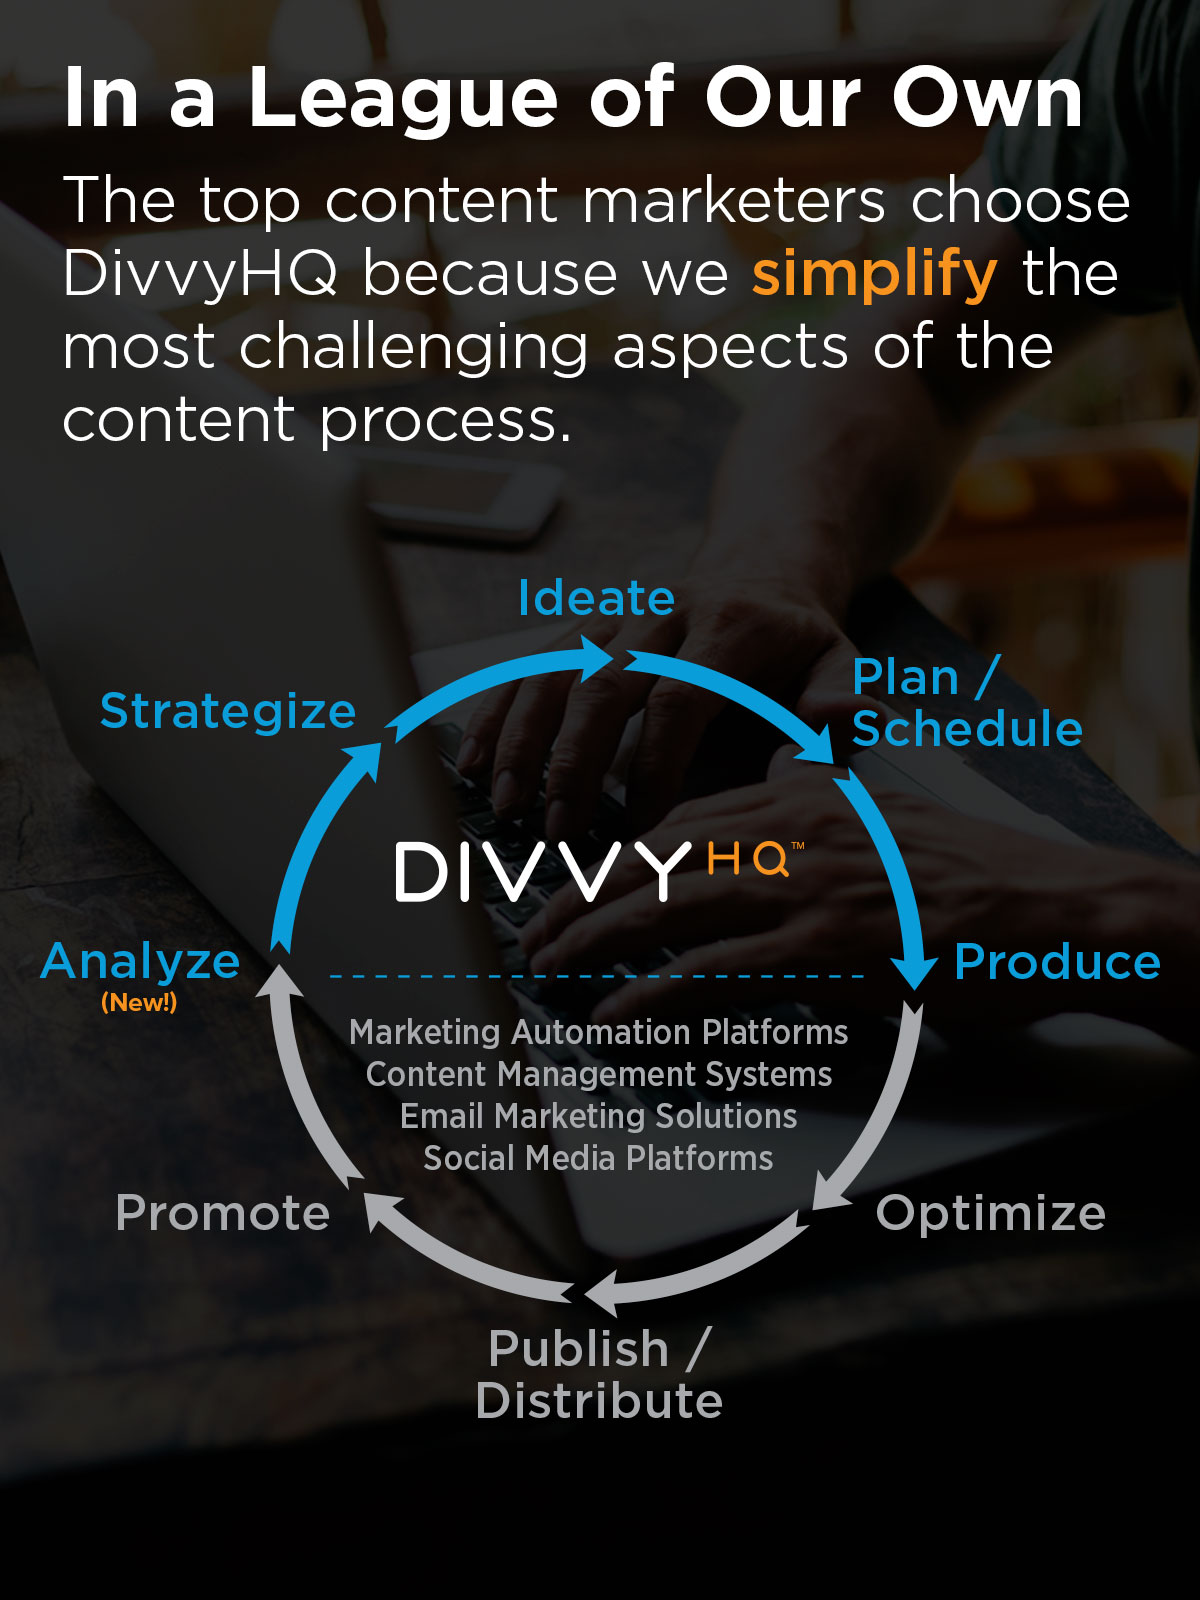 In a League of Our Own. The top content marketers choose DivvyHQ because we simplify the most challenging aspects of the content process.